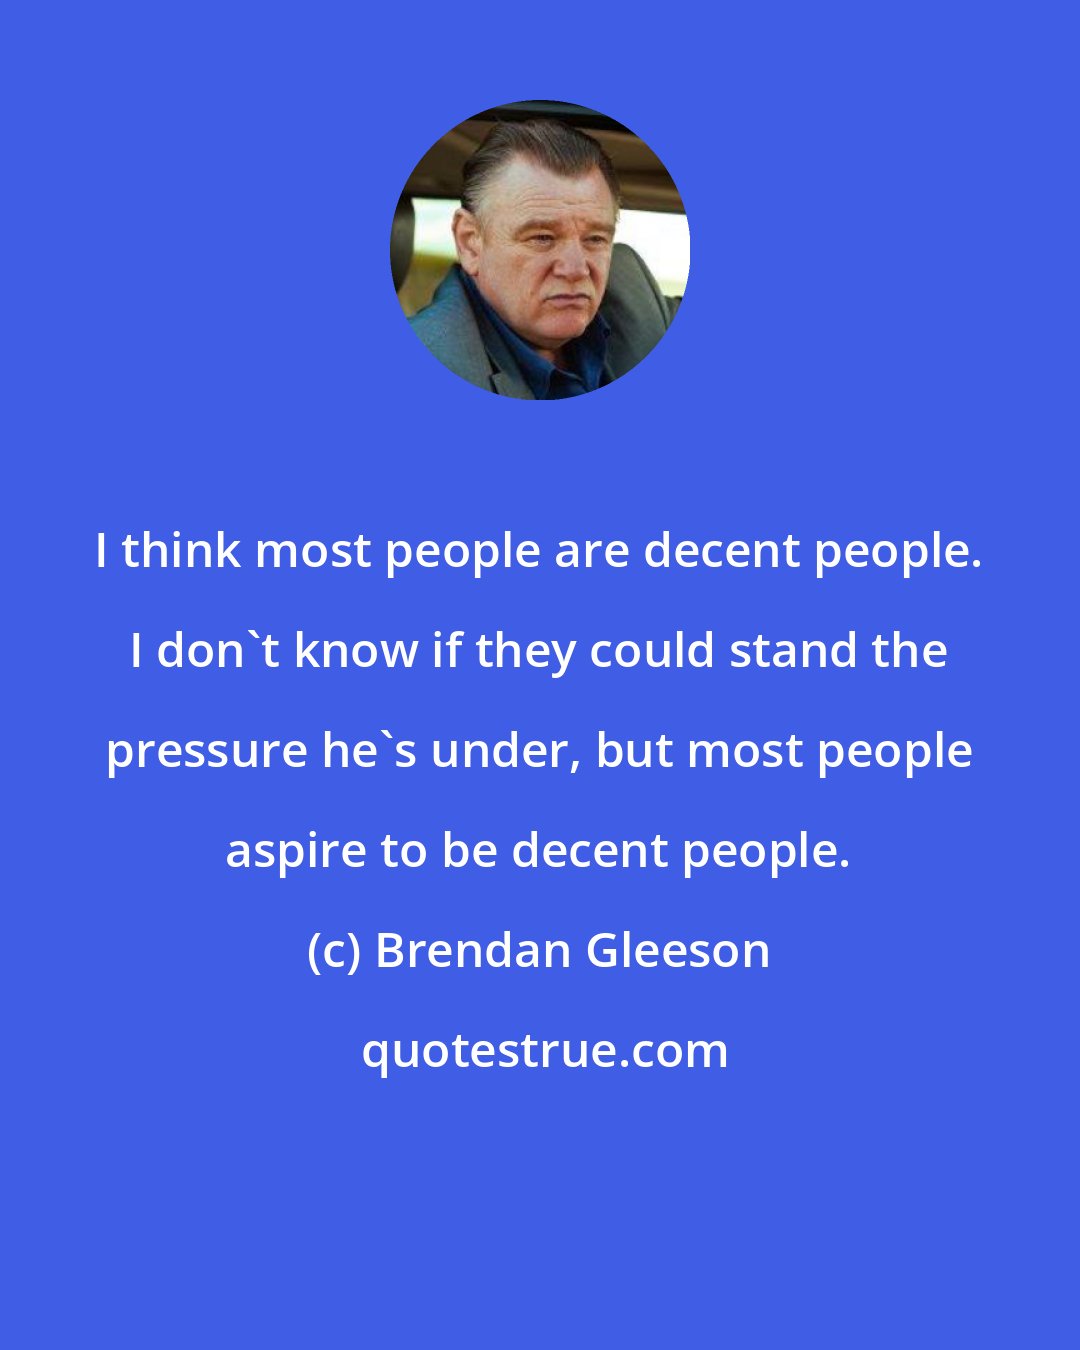 Brendan Gleeson: I think most people are decent people. I don't know if they could stand the pressure he's under, but most people aspire to be decent people.